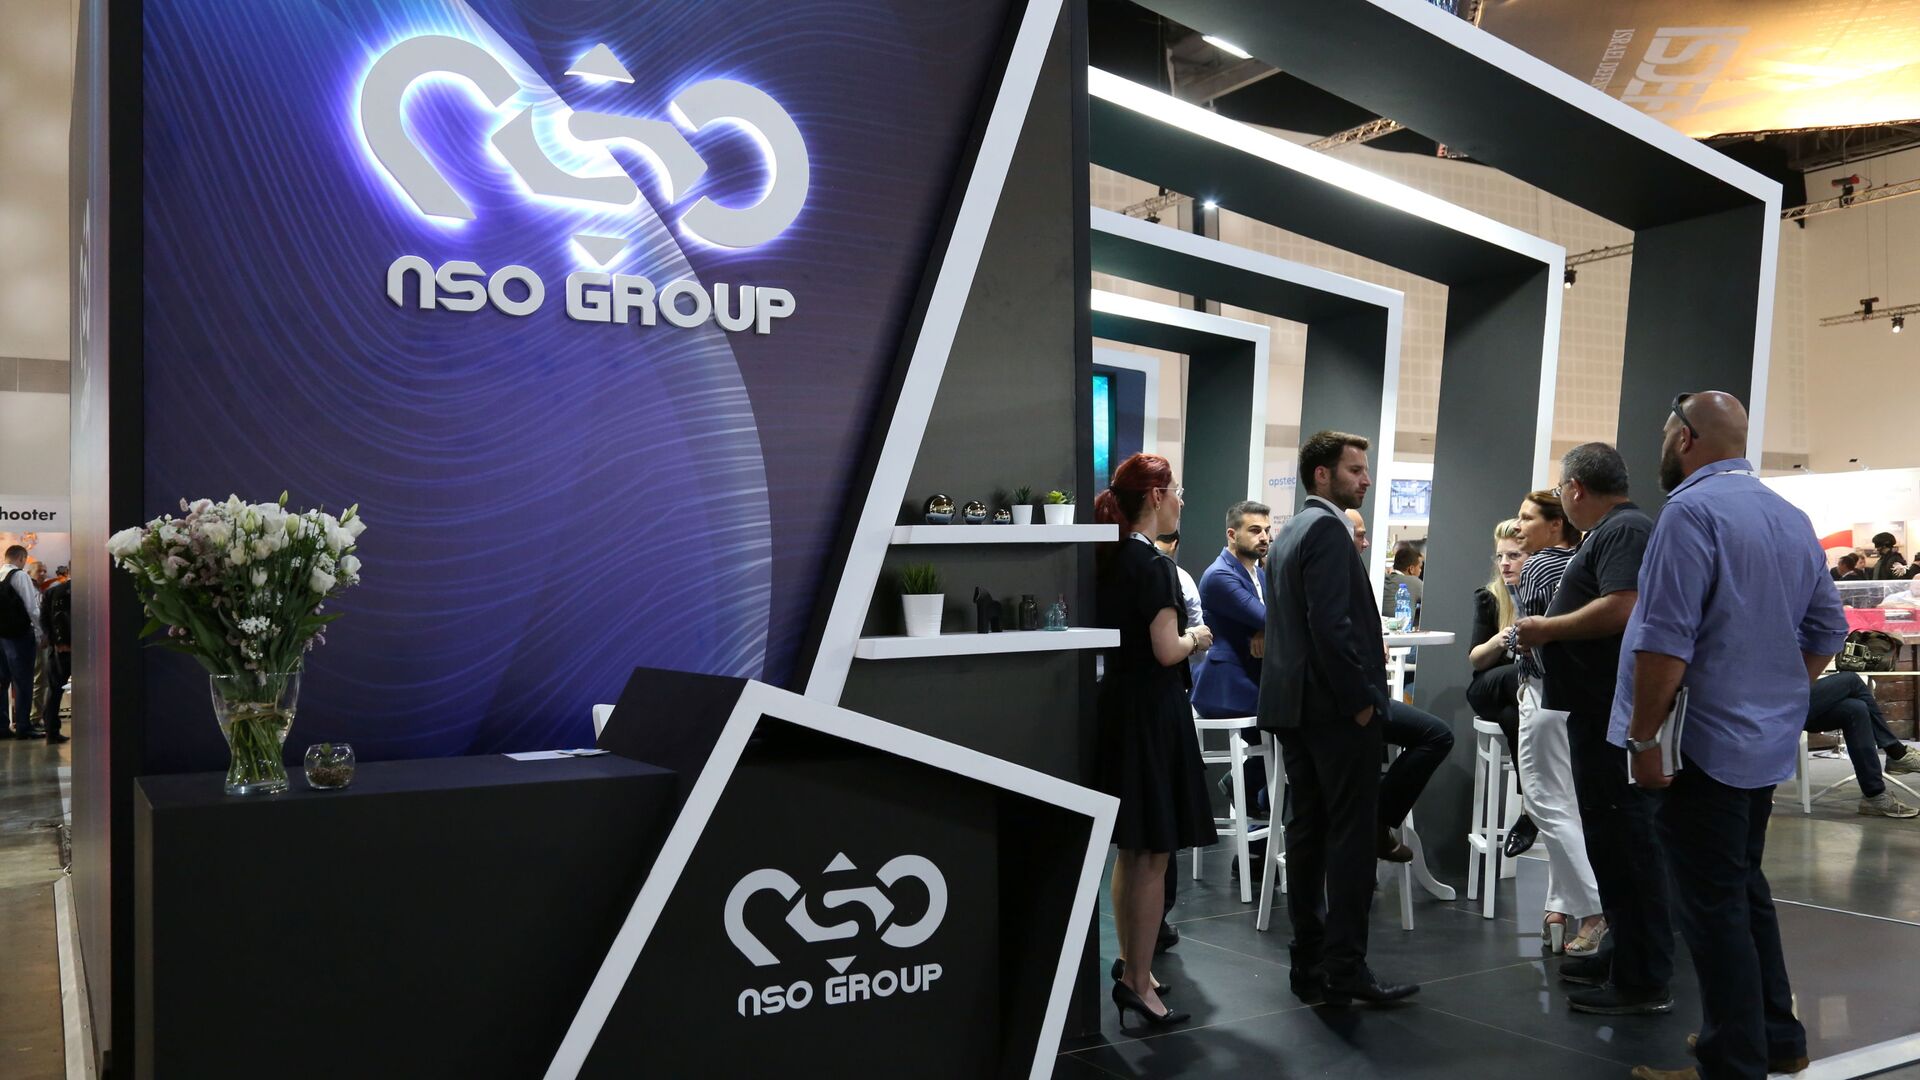 Israeli cyber firm NSO Group's exhibition stand is seen at ISDEF 2019, an international defence and homeland security expo, in Tel Aviv, Israel June 4, 2019. Picture taken June 4, 2019. - Sputnik International, 1920, 07.10.2021